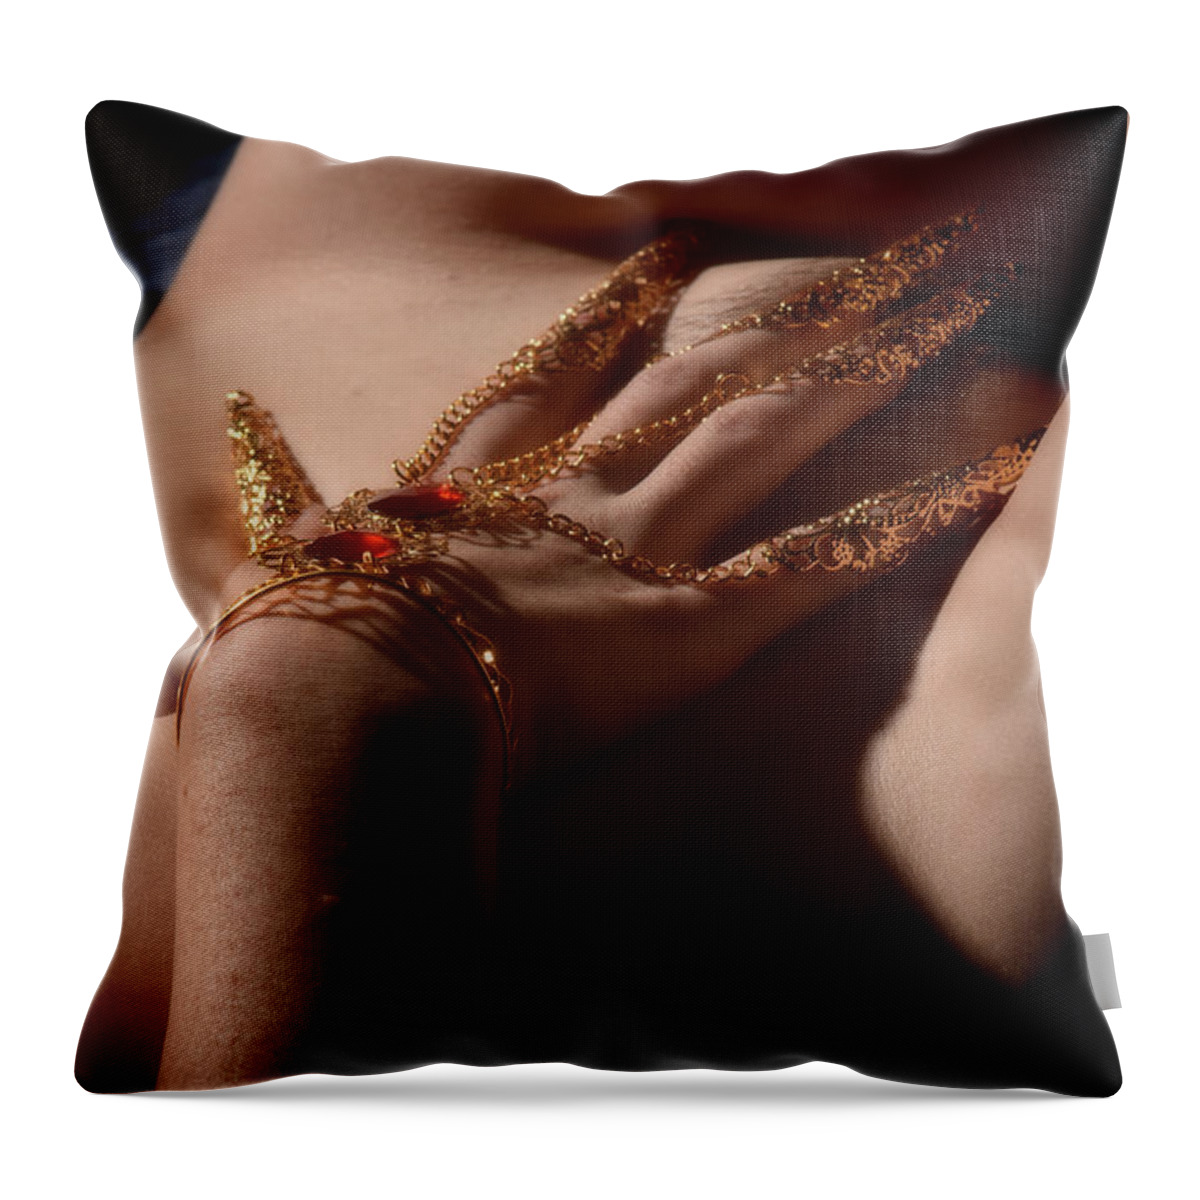 Details Throw Pillow featuring the photograph Pointed II by Michael McGowan